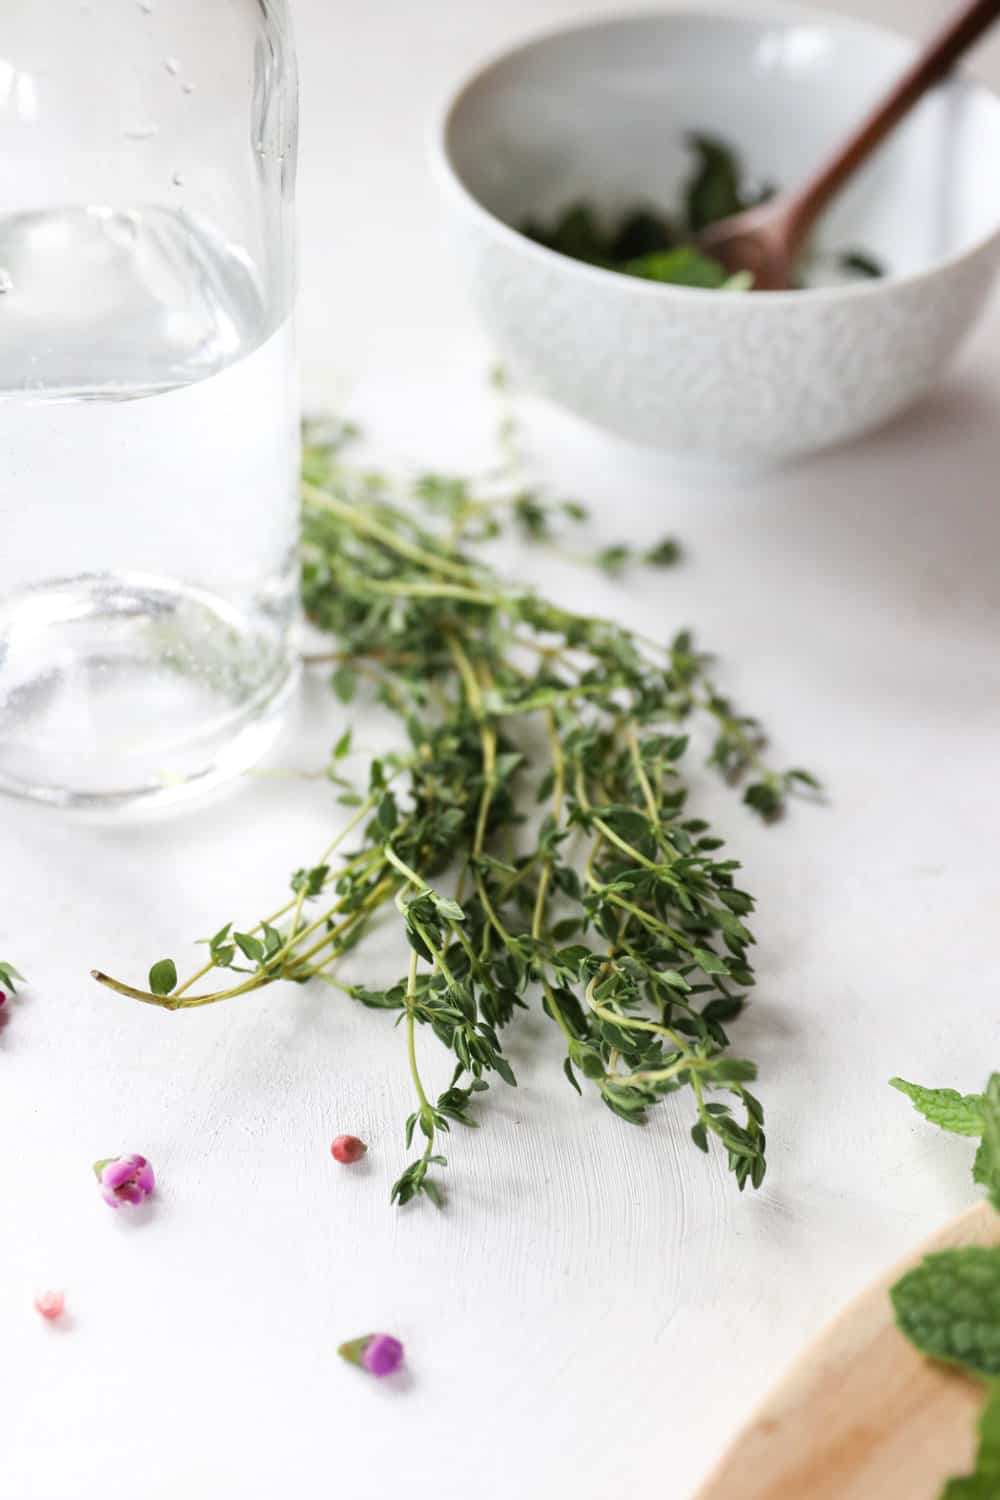 How to Make an Herbal Poultice